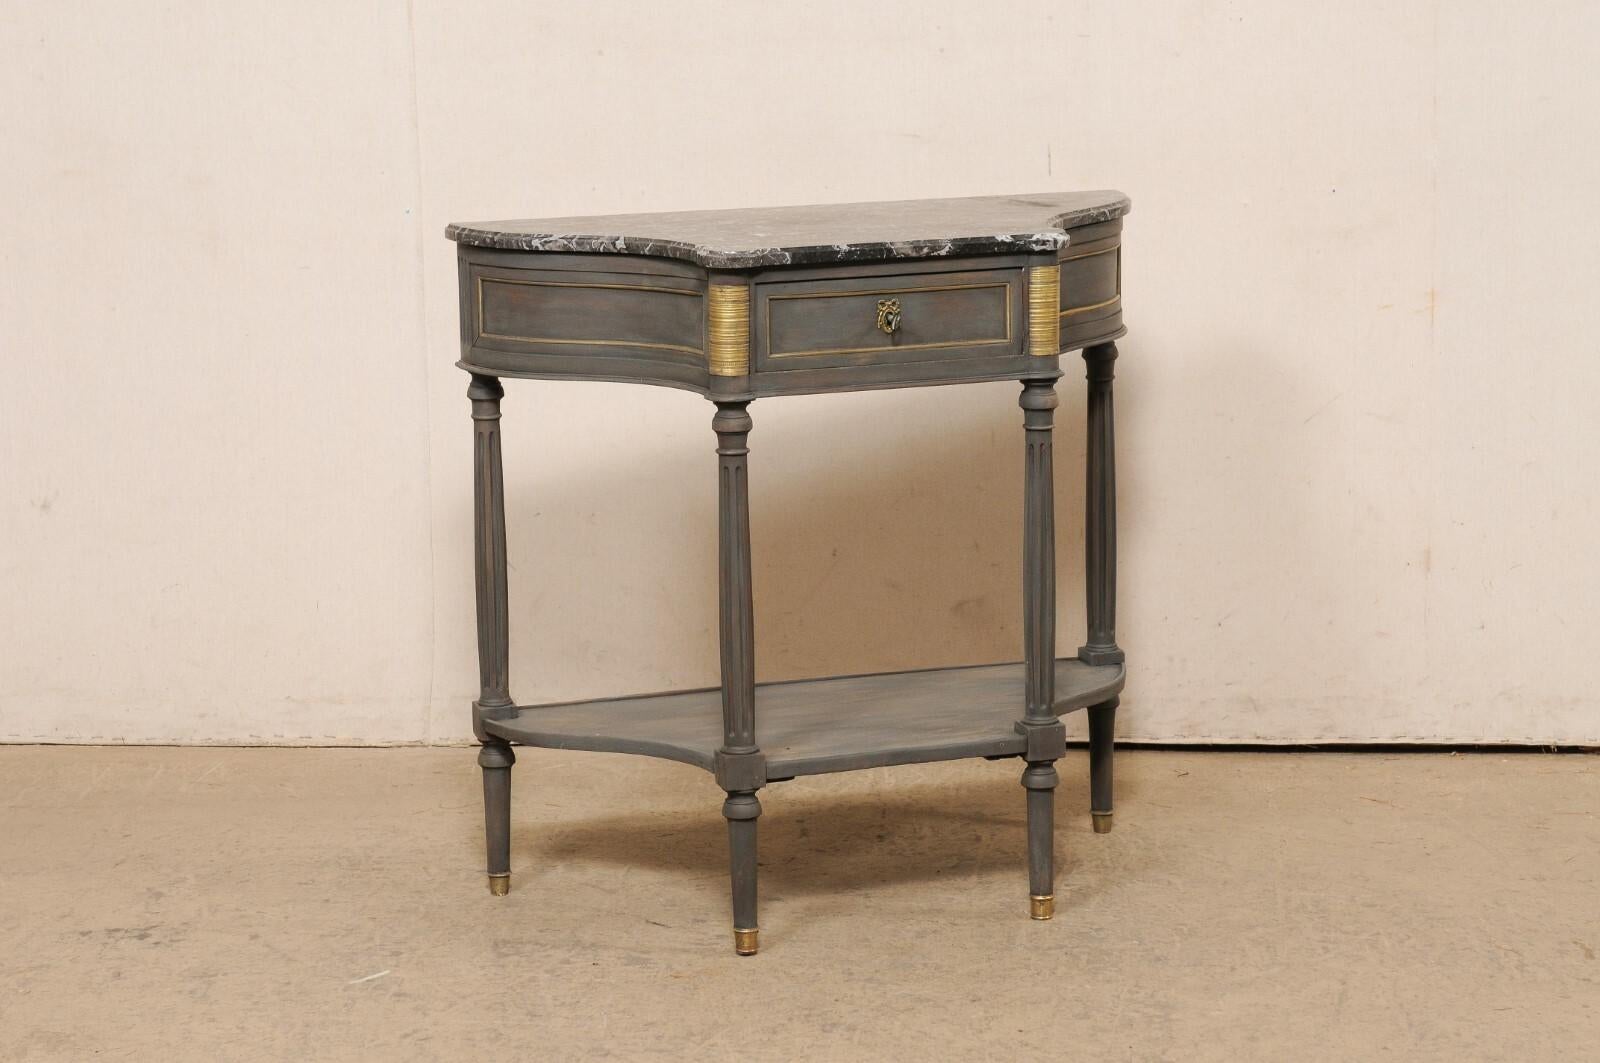 A French Neoclassical carved and painted wood demi lune console, with marble top and brass accents, from the 19th century. This antique table from France has a black marble top (with gray and white veining), with demi-style shape as the rear/wall